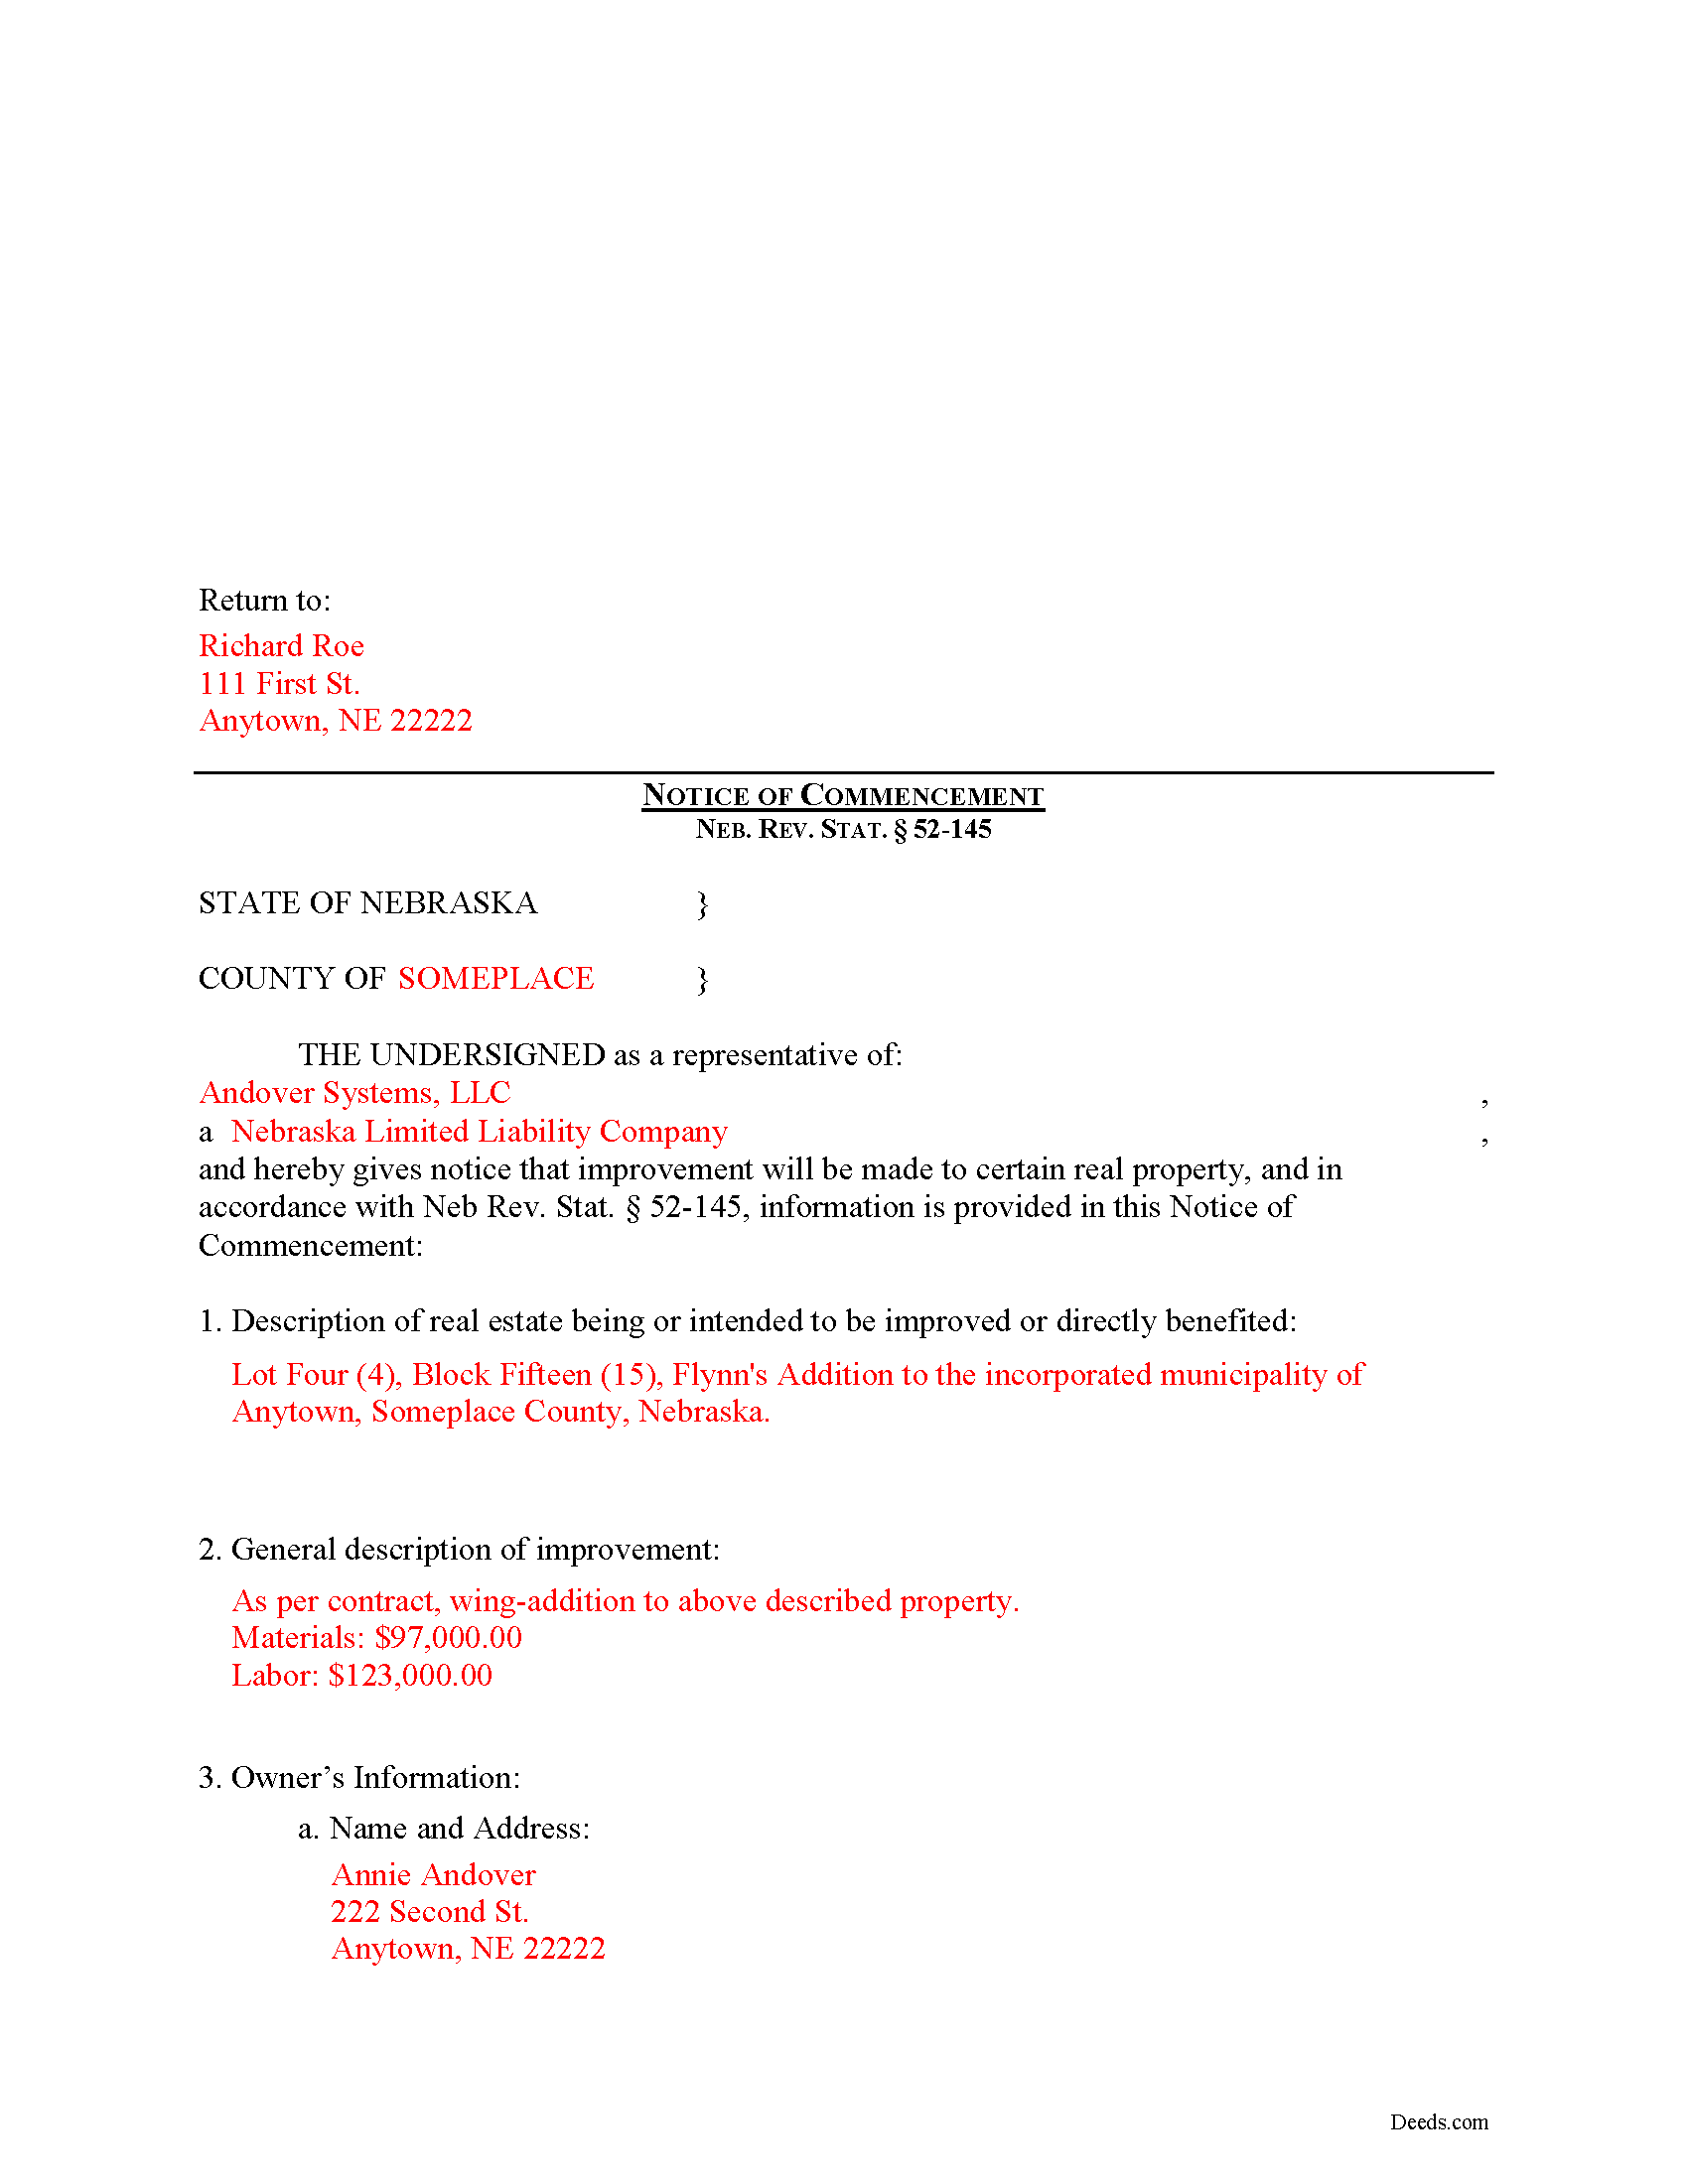 Completed Example of the Notice of Commencement Document